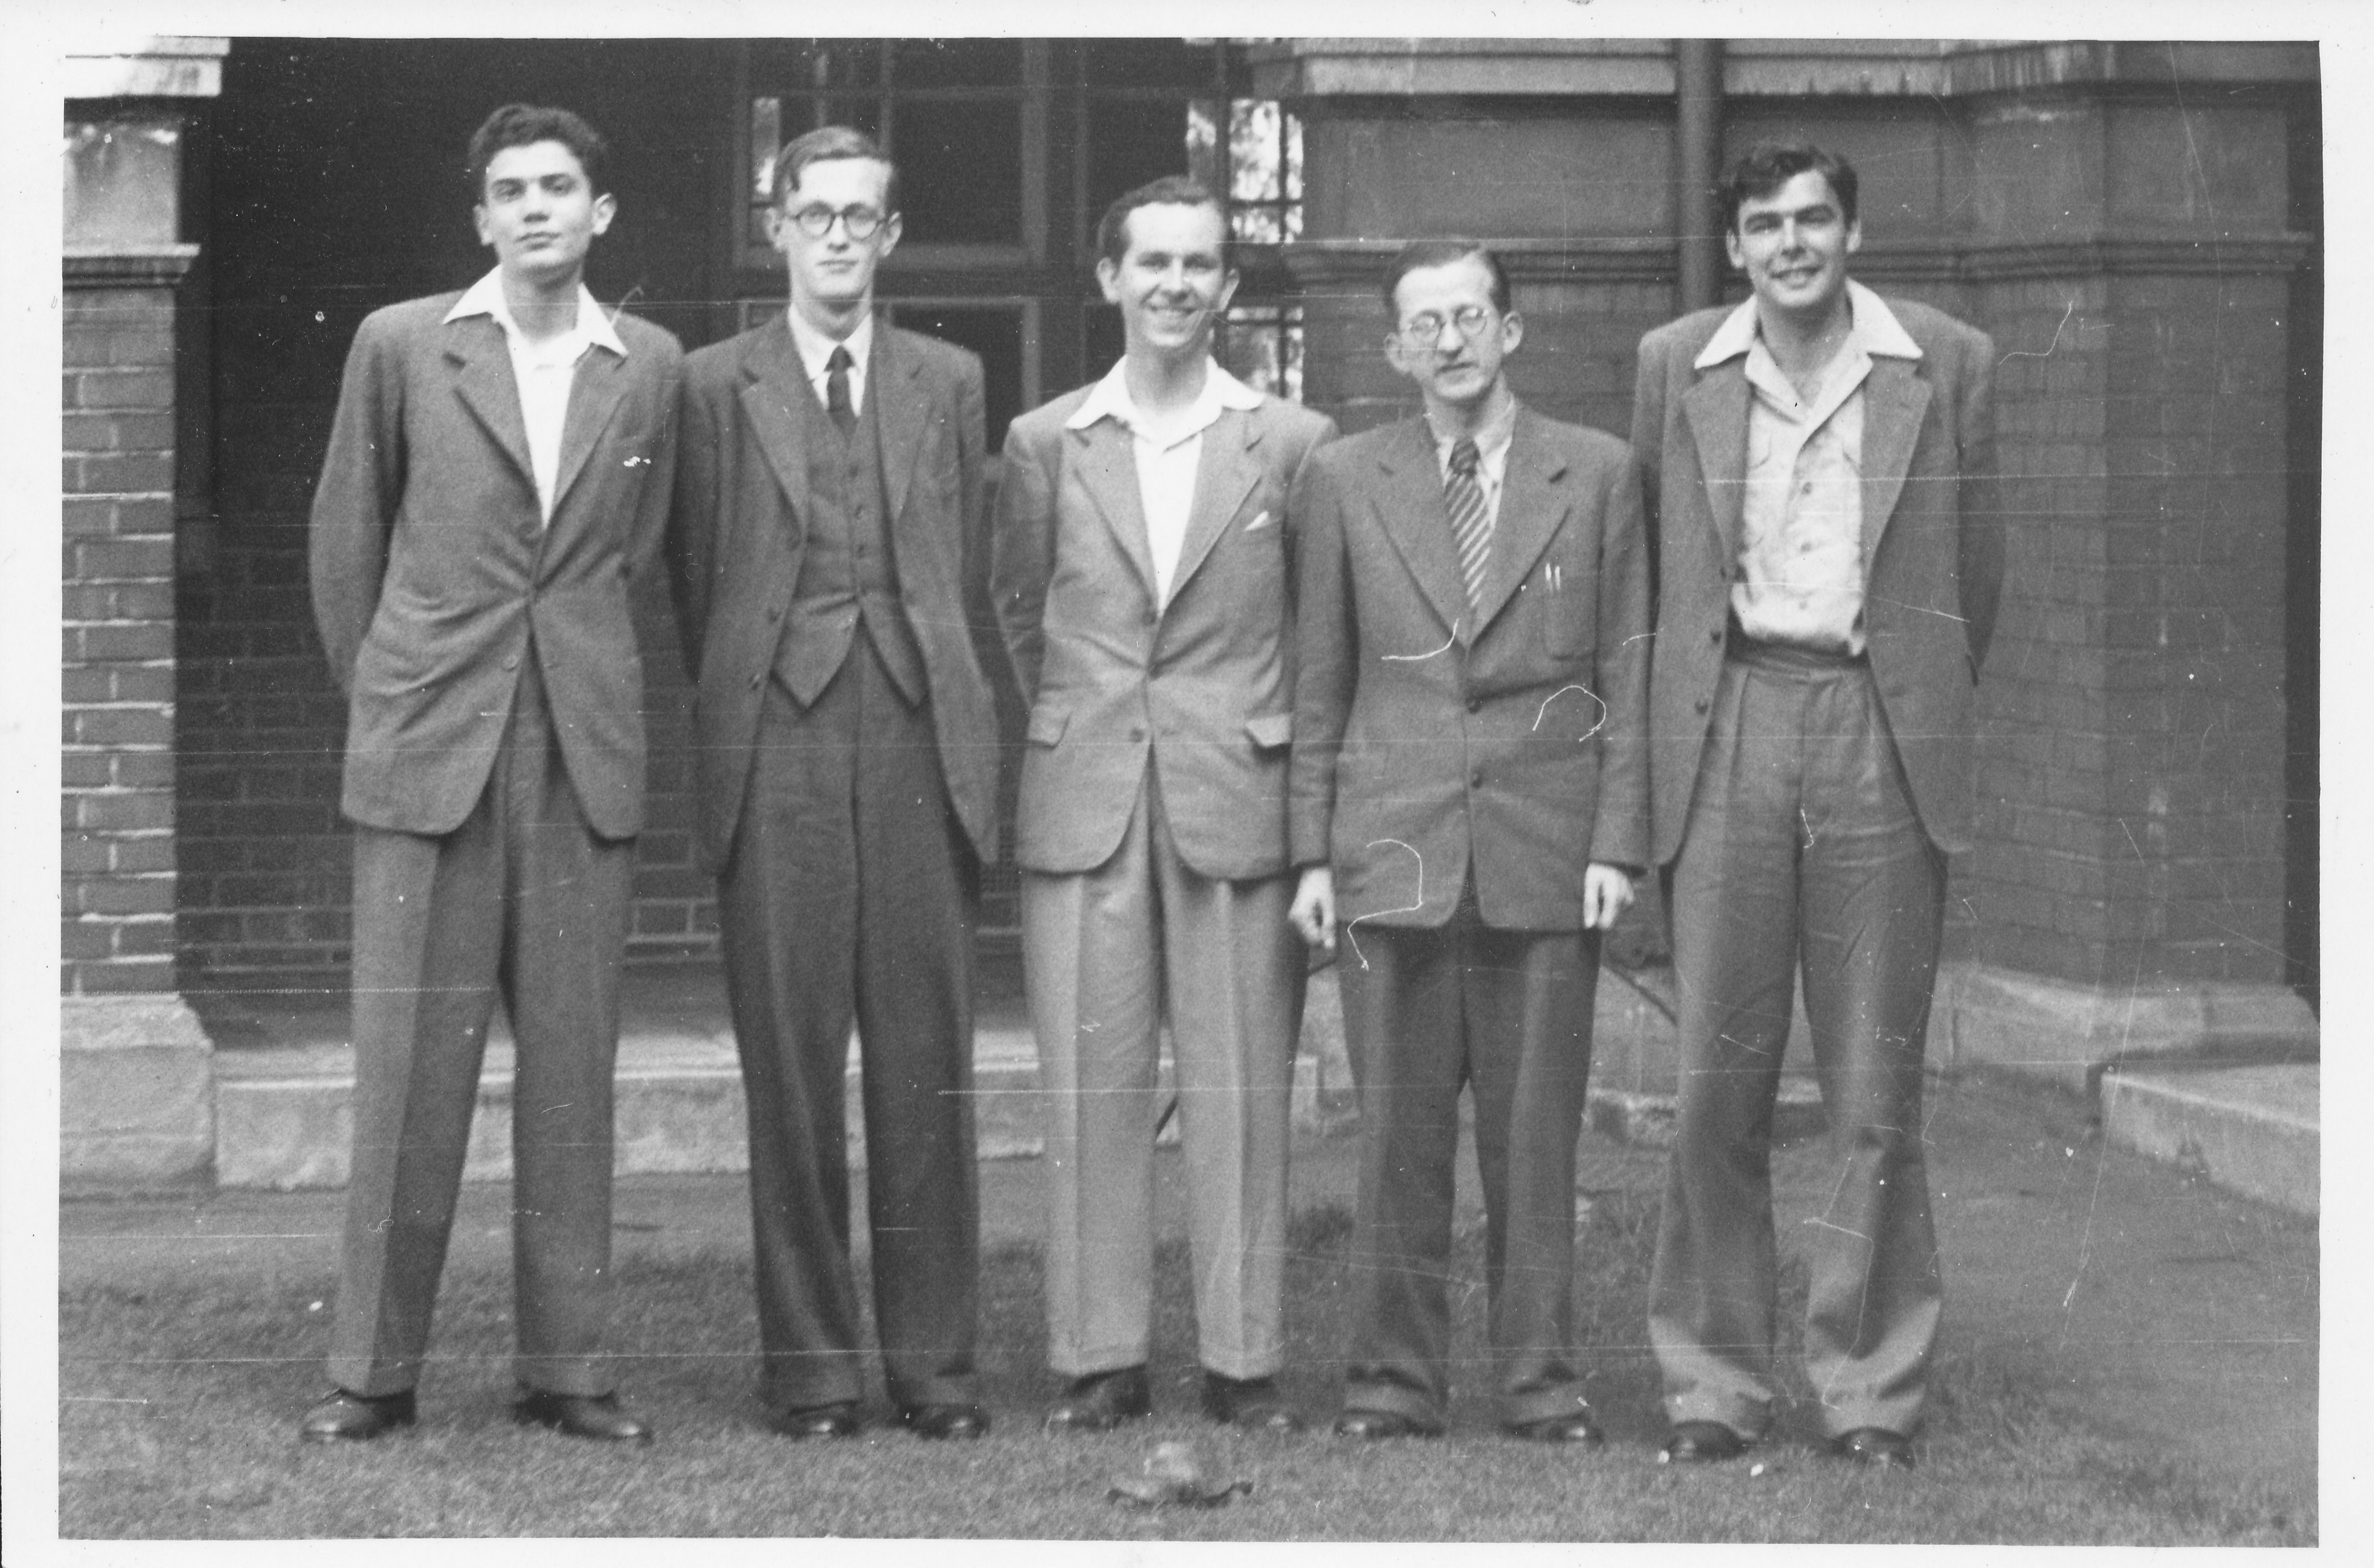 Leonard Barden (centre) with Raaphi Persitz, JB Sykes, OI Galvenius and DM Armstrong, Ilford, May, 1953